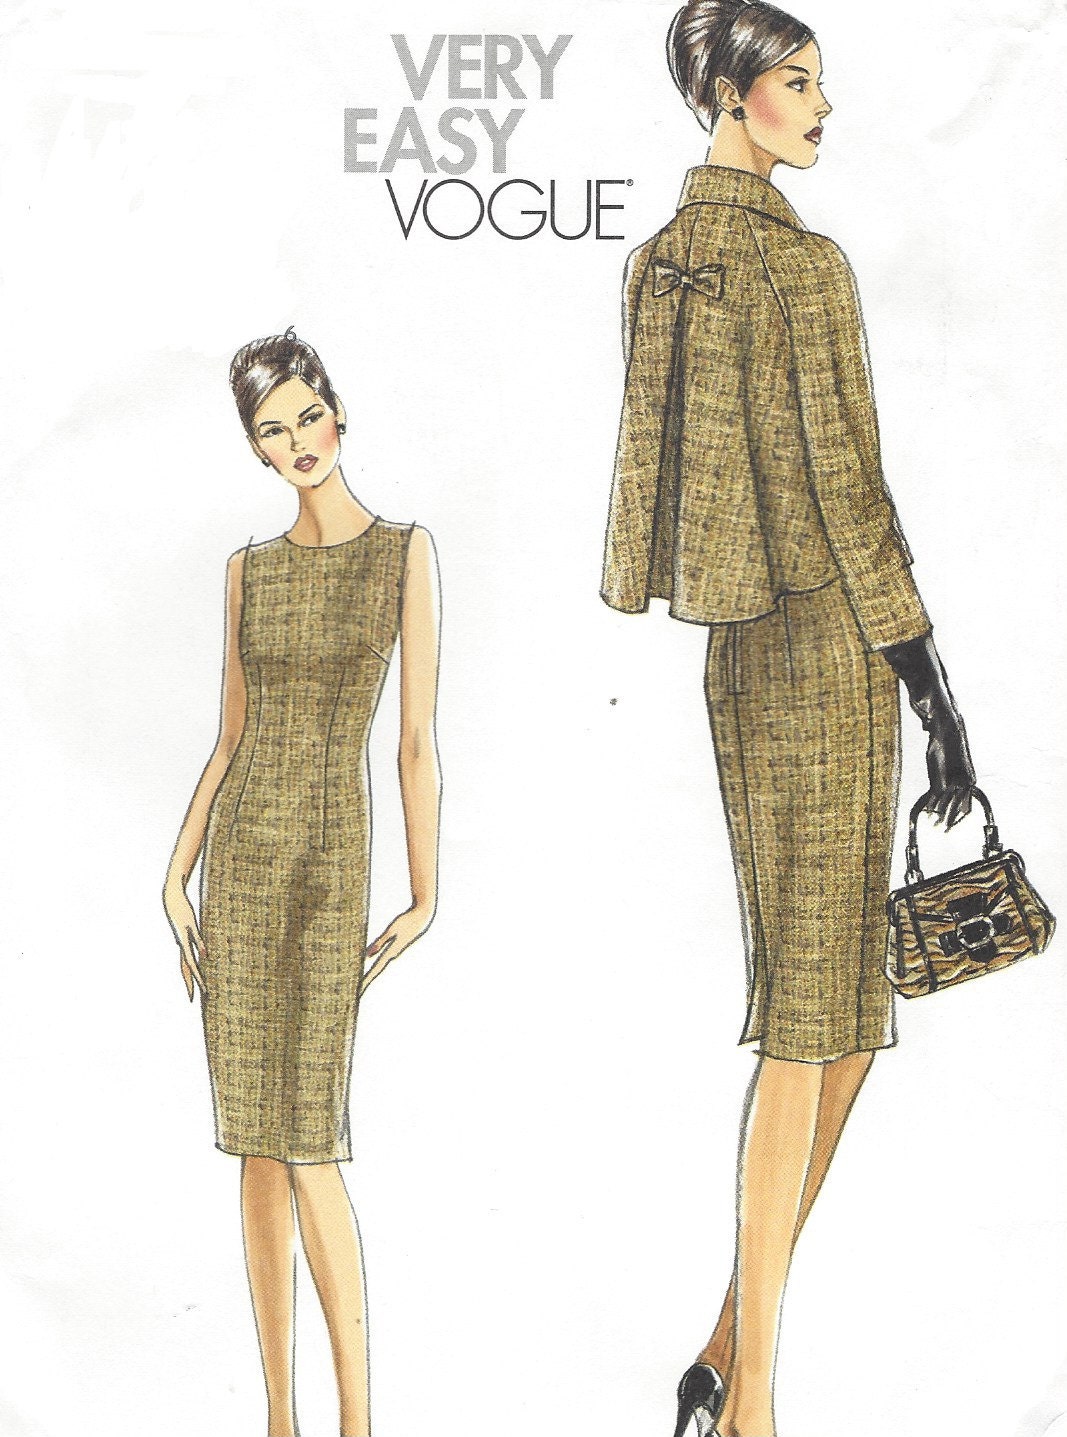 Womens Cropped Swing Jacket and Sheath Dress Vogue Sewing